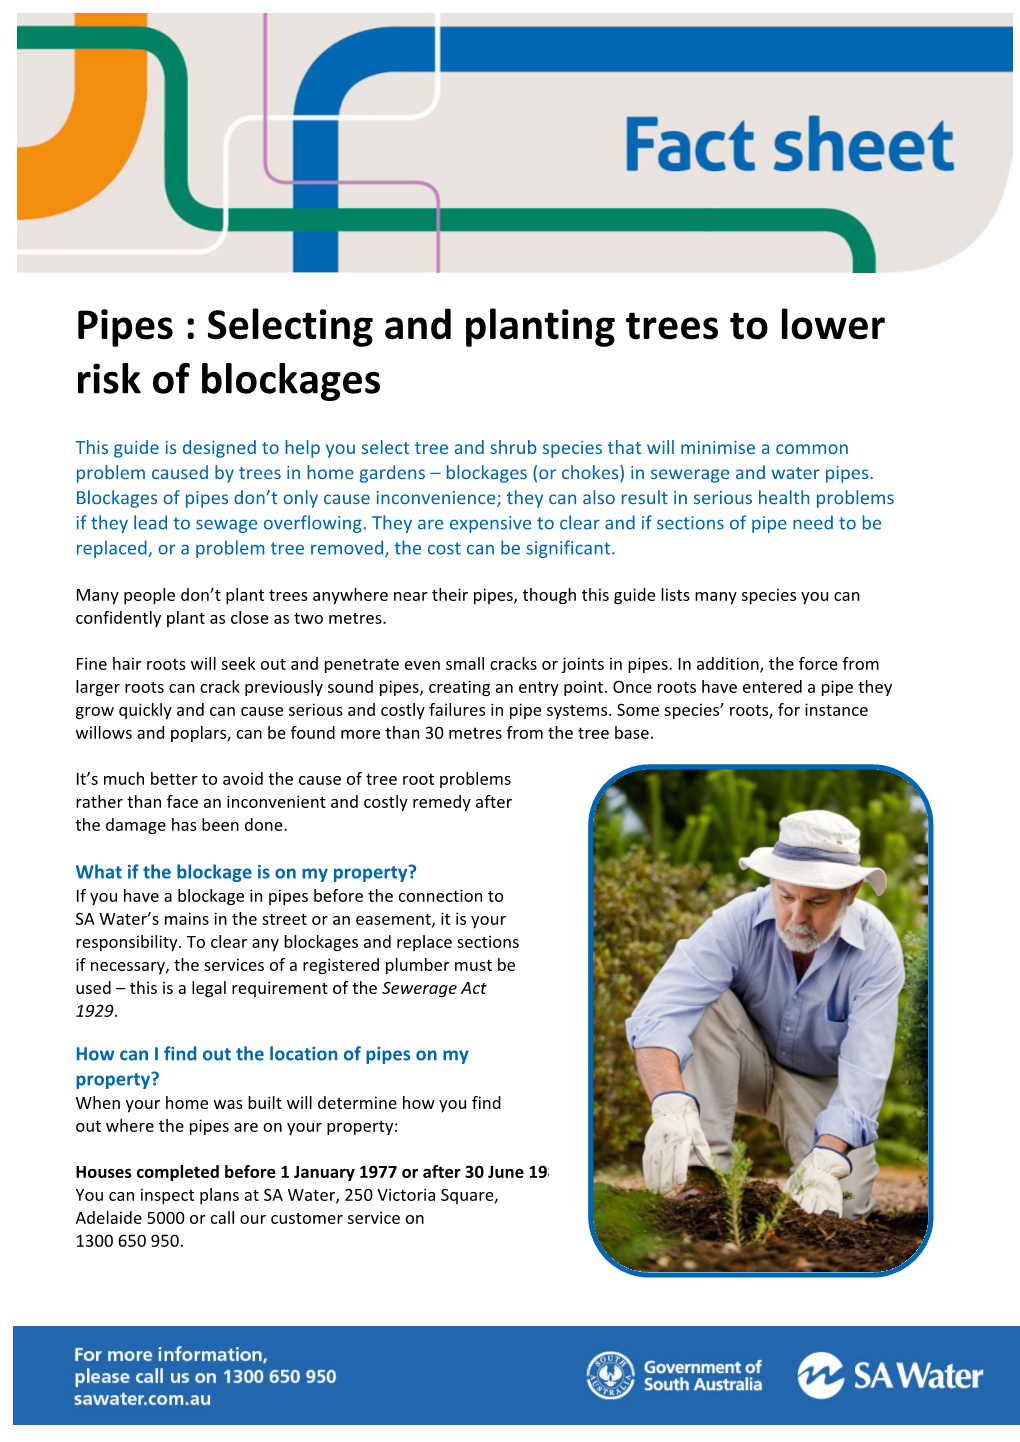 Selecting and Planting Trees to Lower Risk of Pipe Blockages